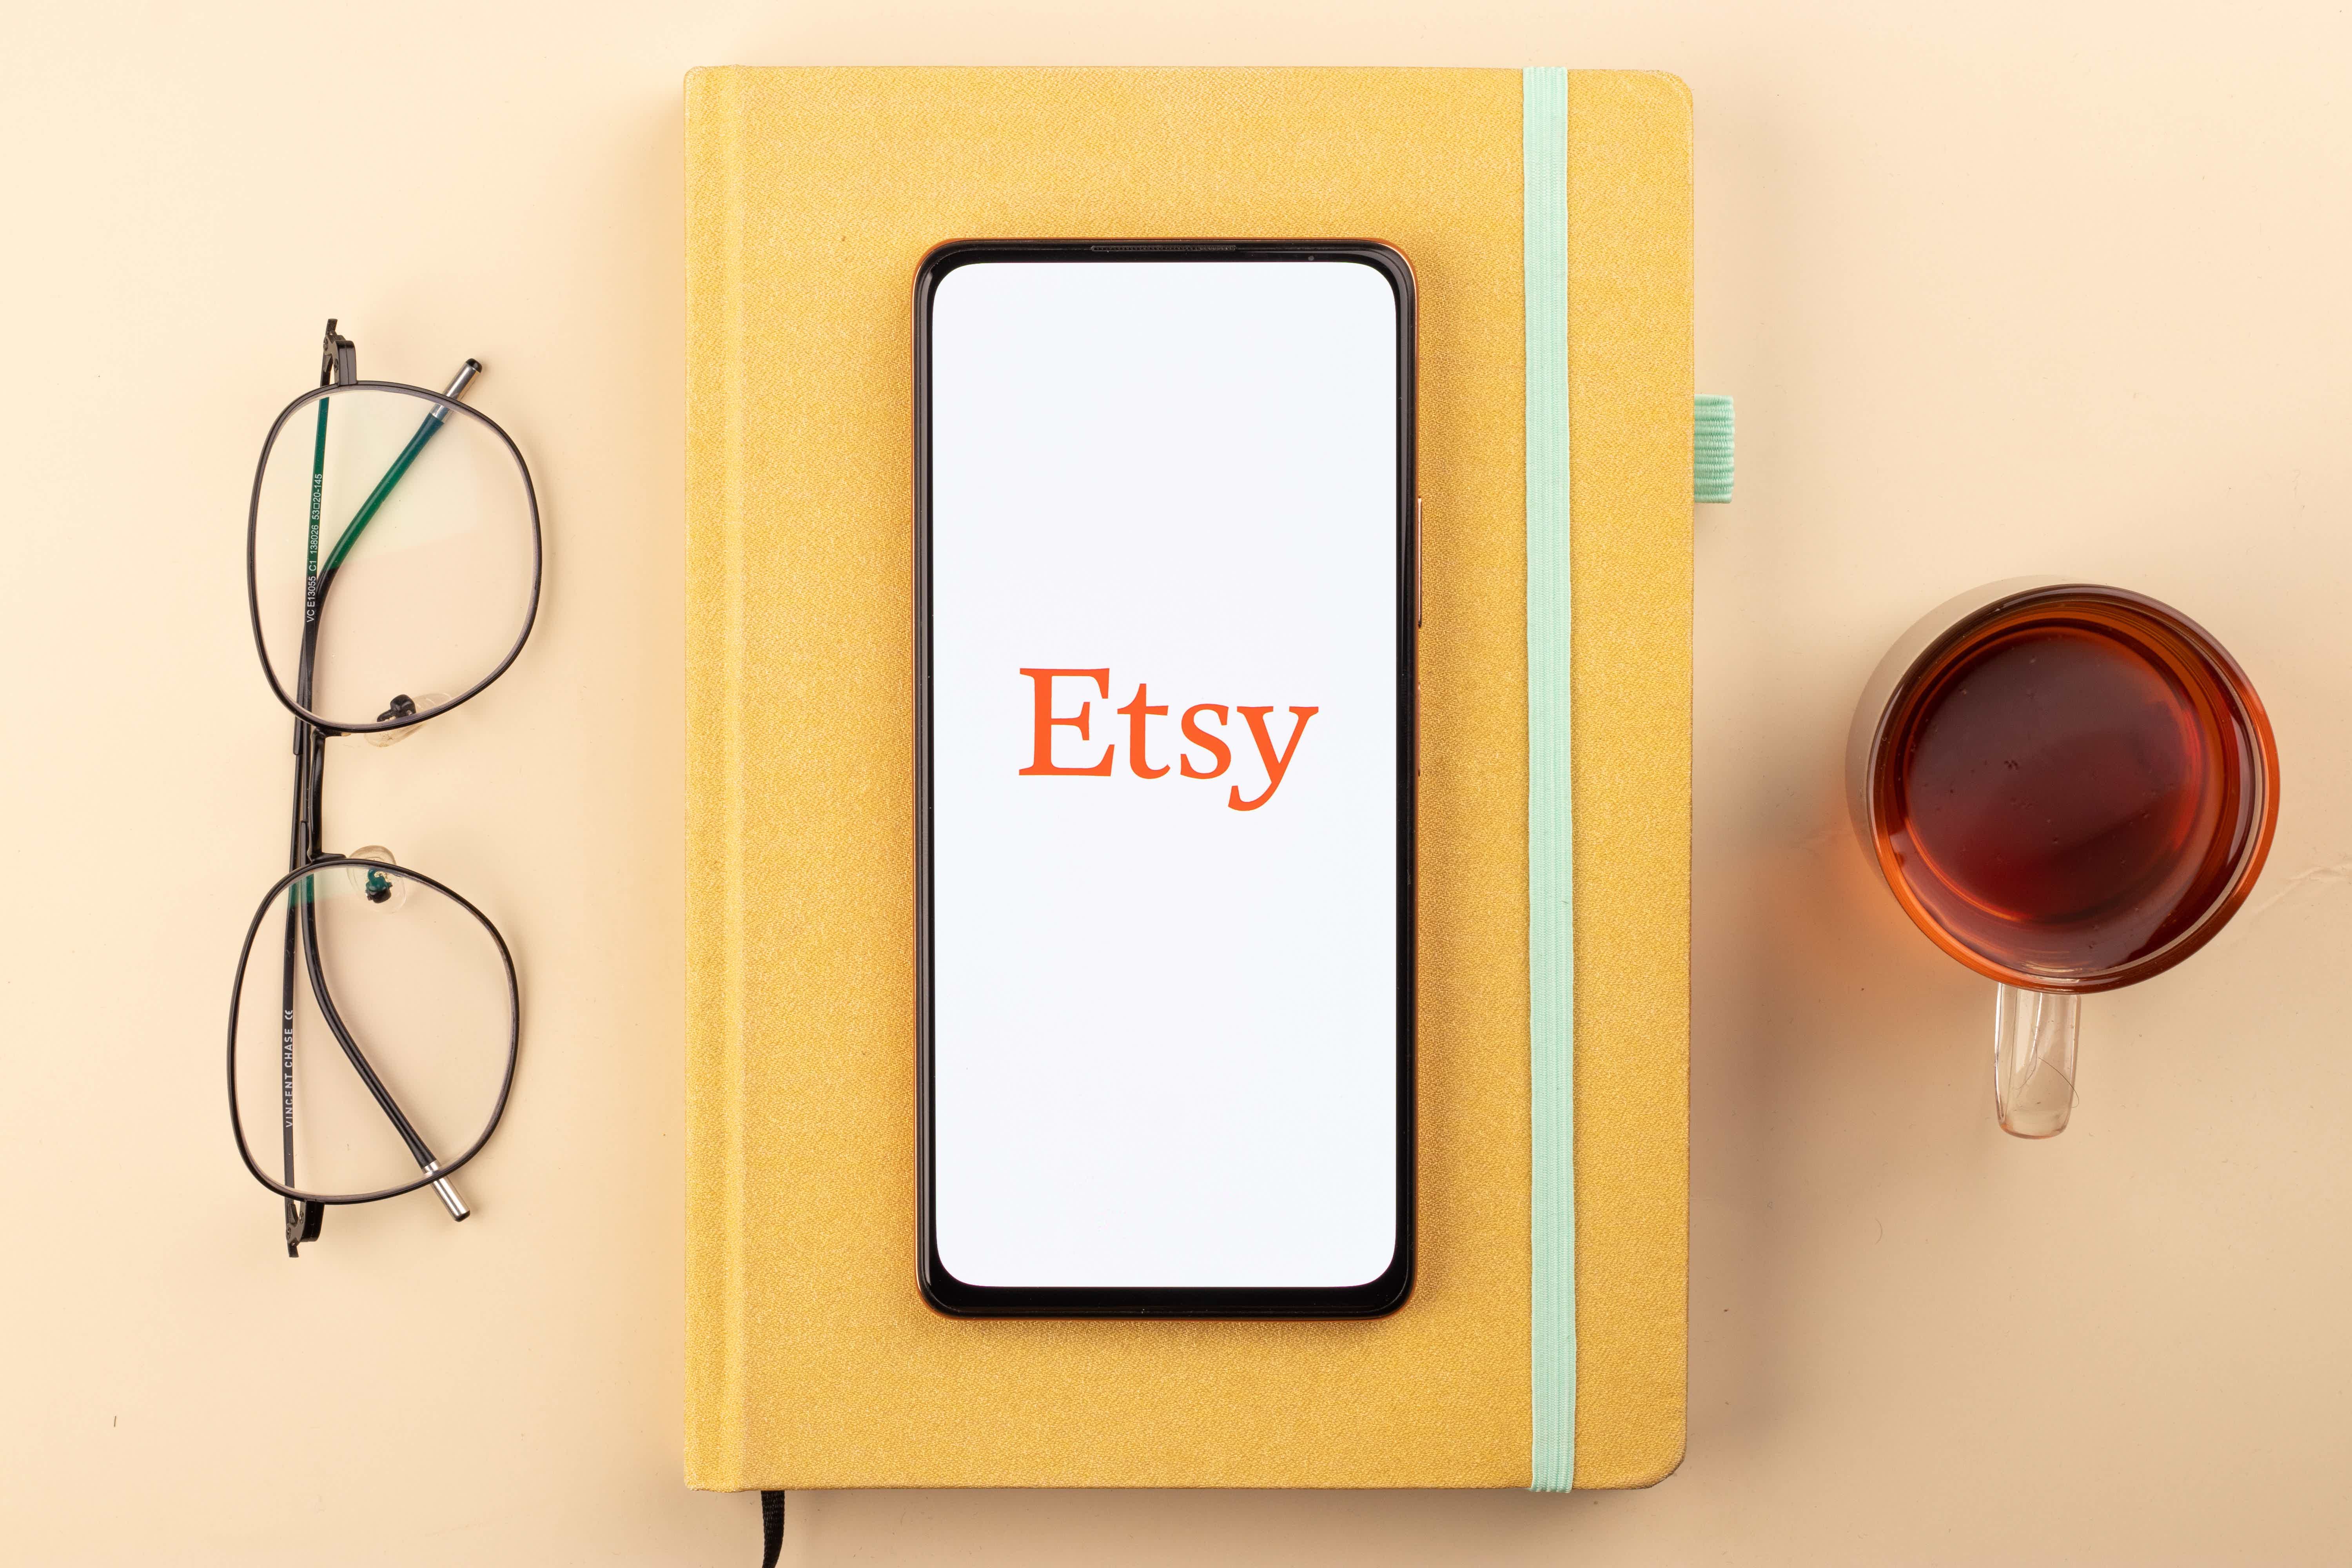 Learn more about Etsy stocks (ETSY). Source: Adobe Stock.